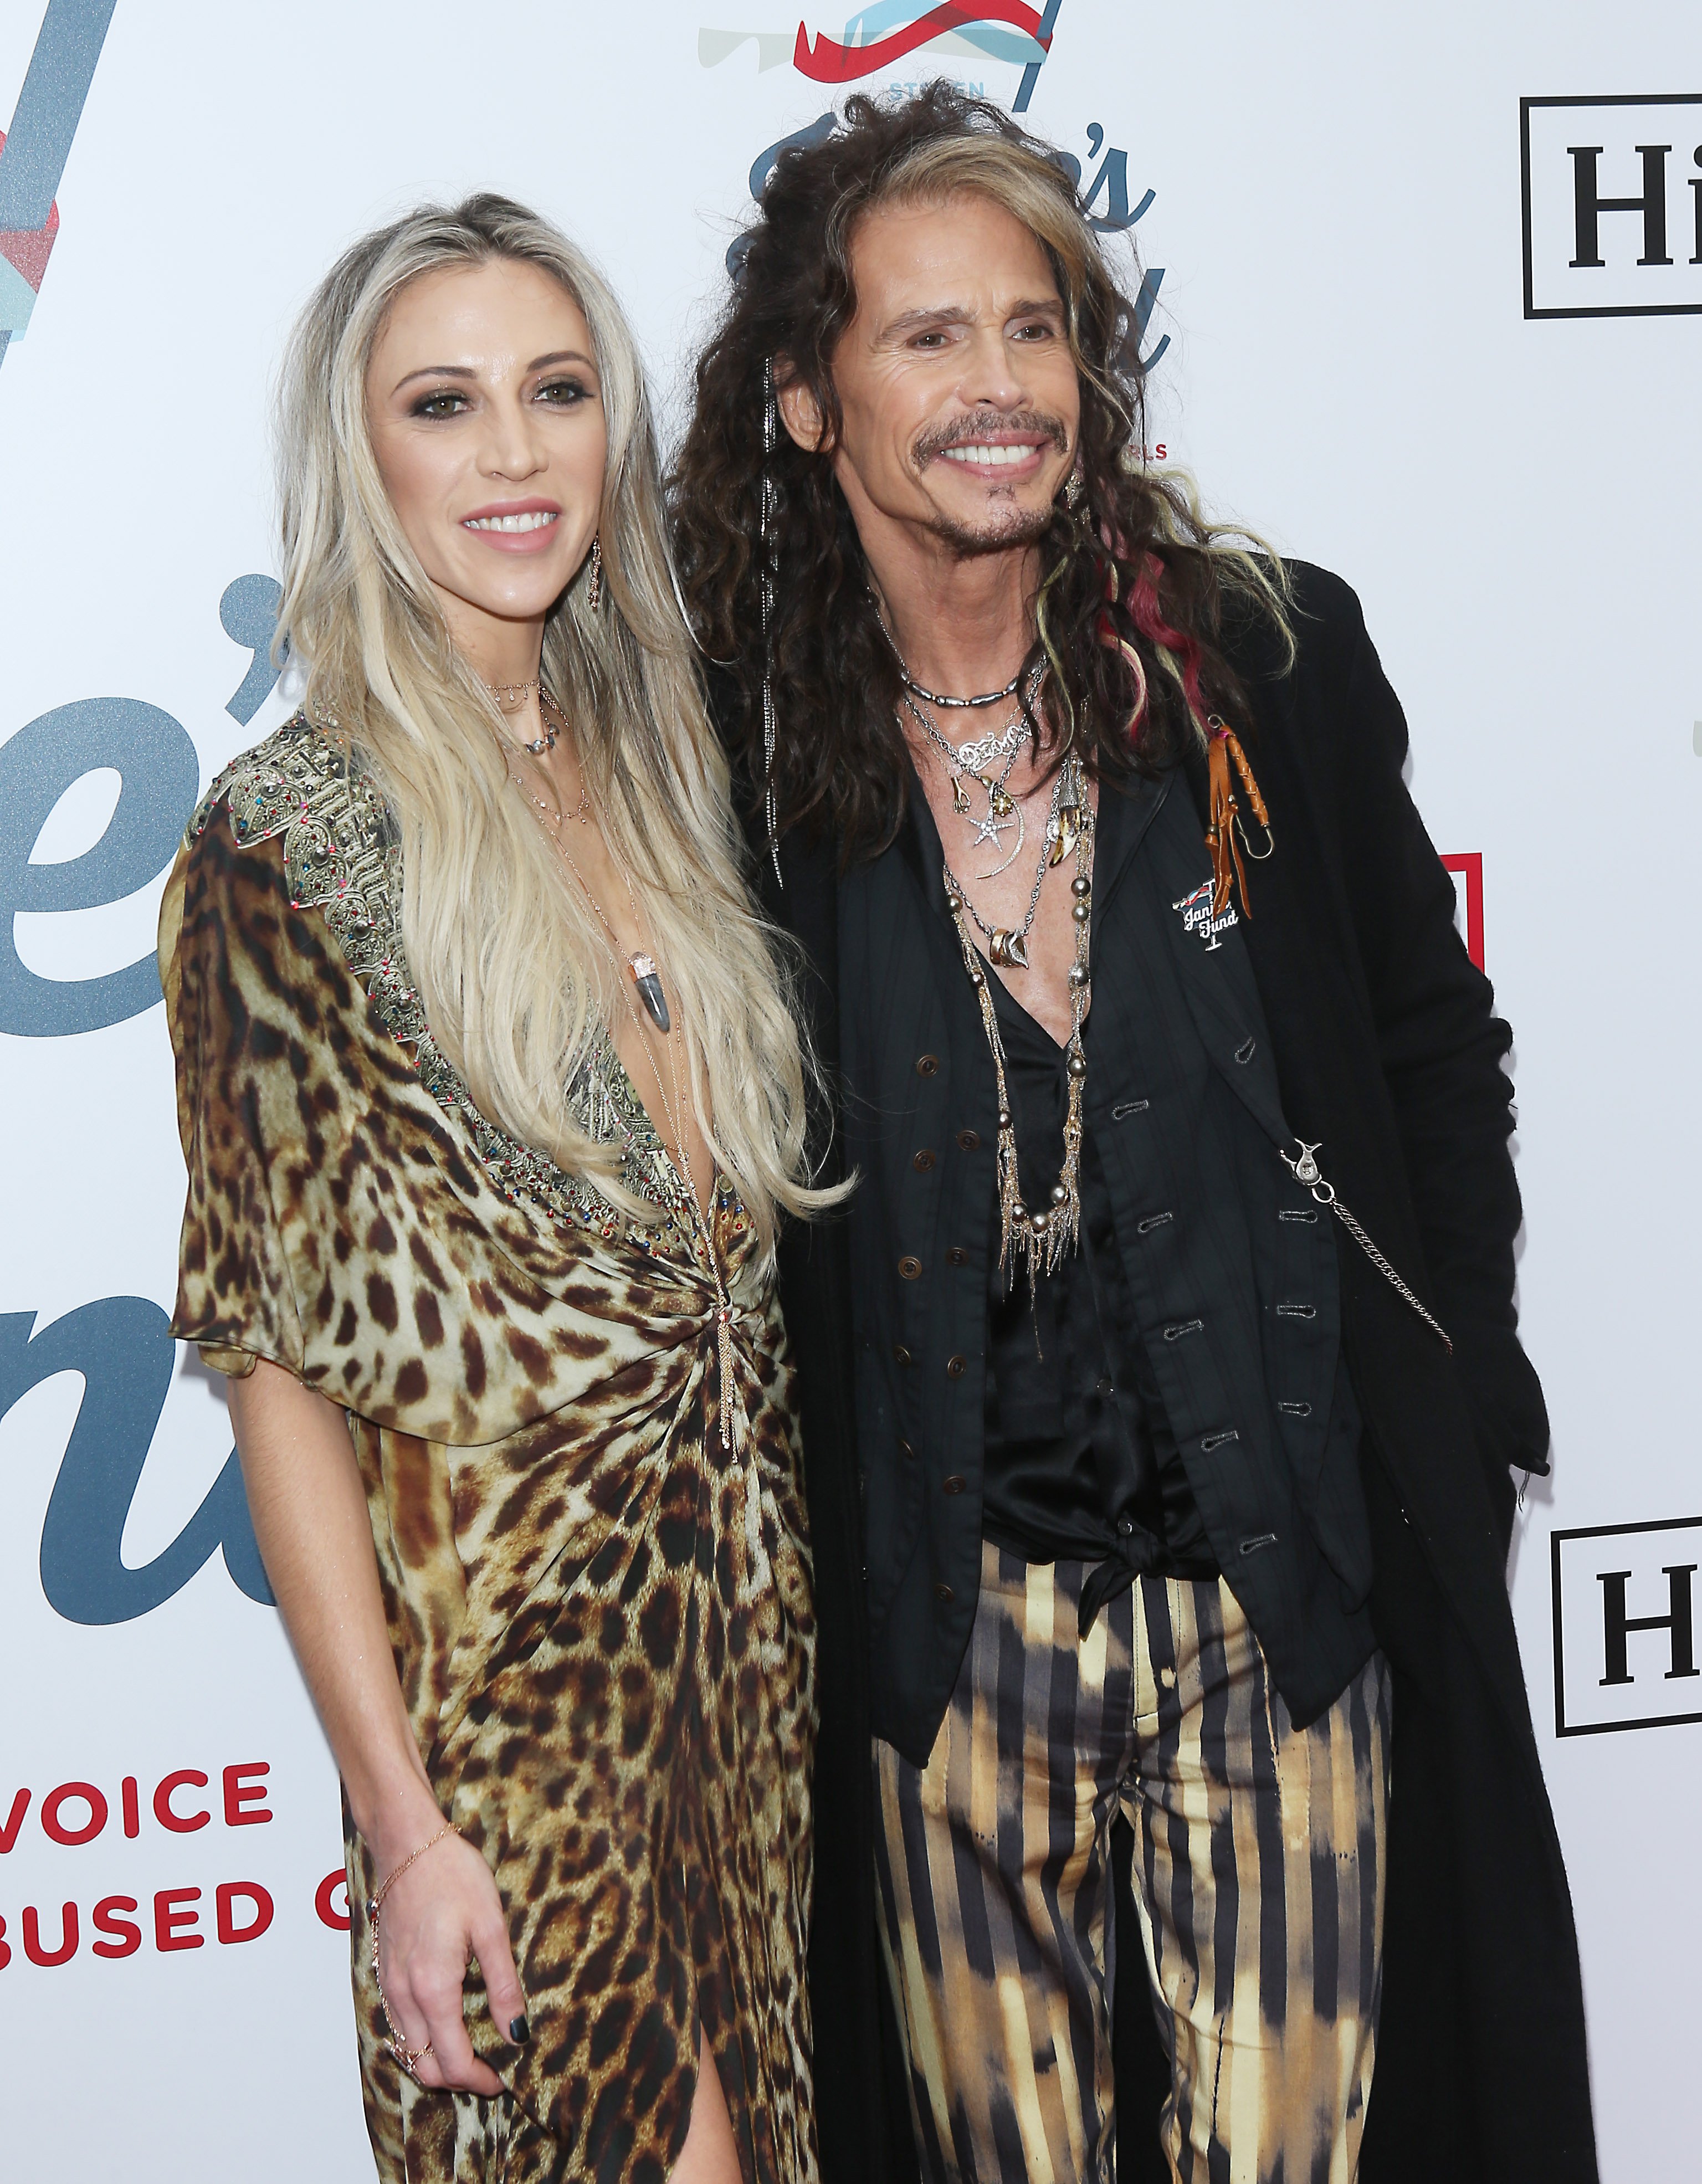 Steven Tyler and Aimee Preston at Steven Tyler's GRAMMY Awards viewing party on February 10, 2019 | Photo: GettyImages